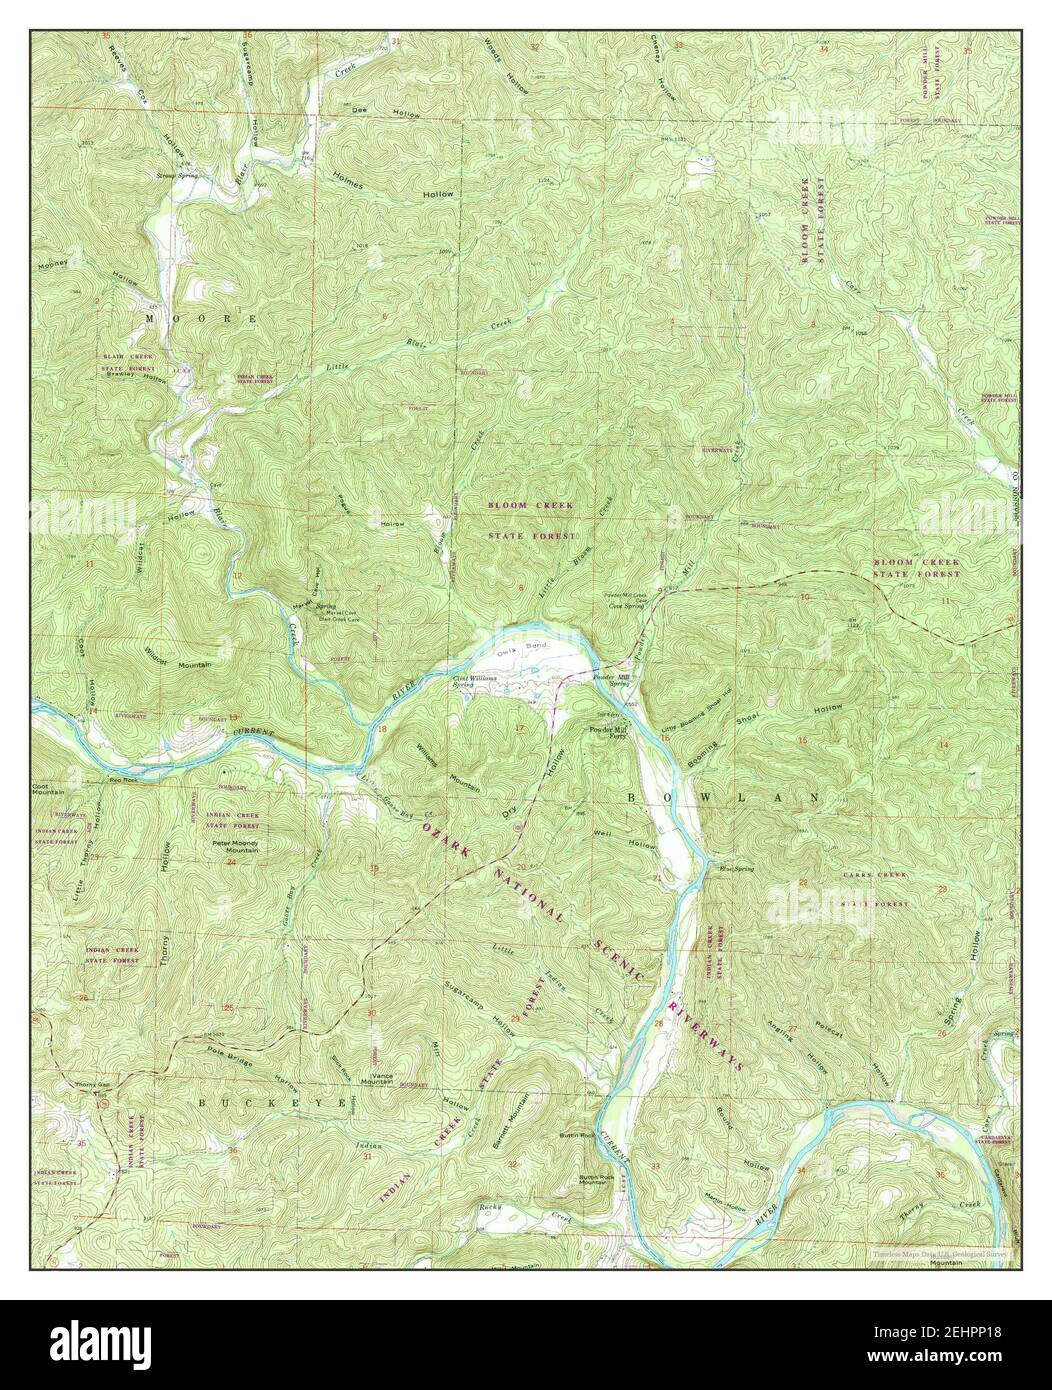 Powder Mill Ferry, Missouri, map 1965, 1:24000, United States of America by Timeless Maps, data U.S. Geological Survey Stock Photo